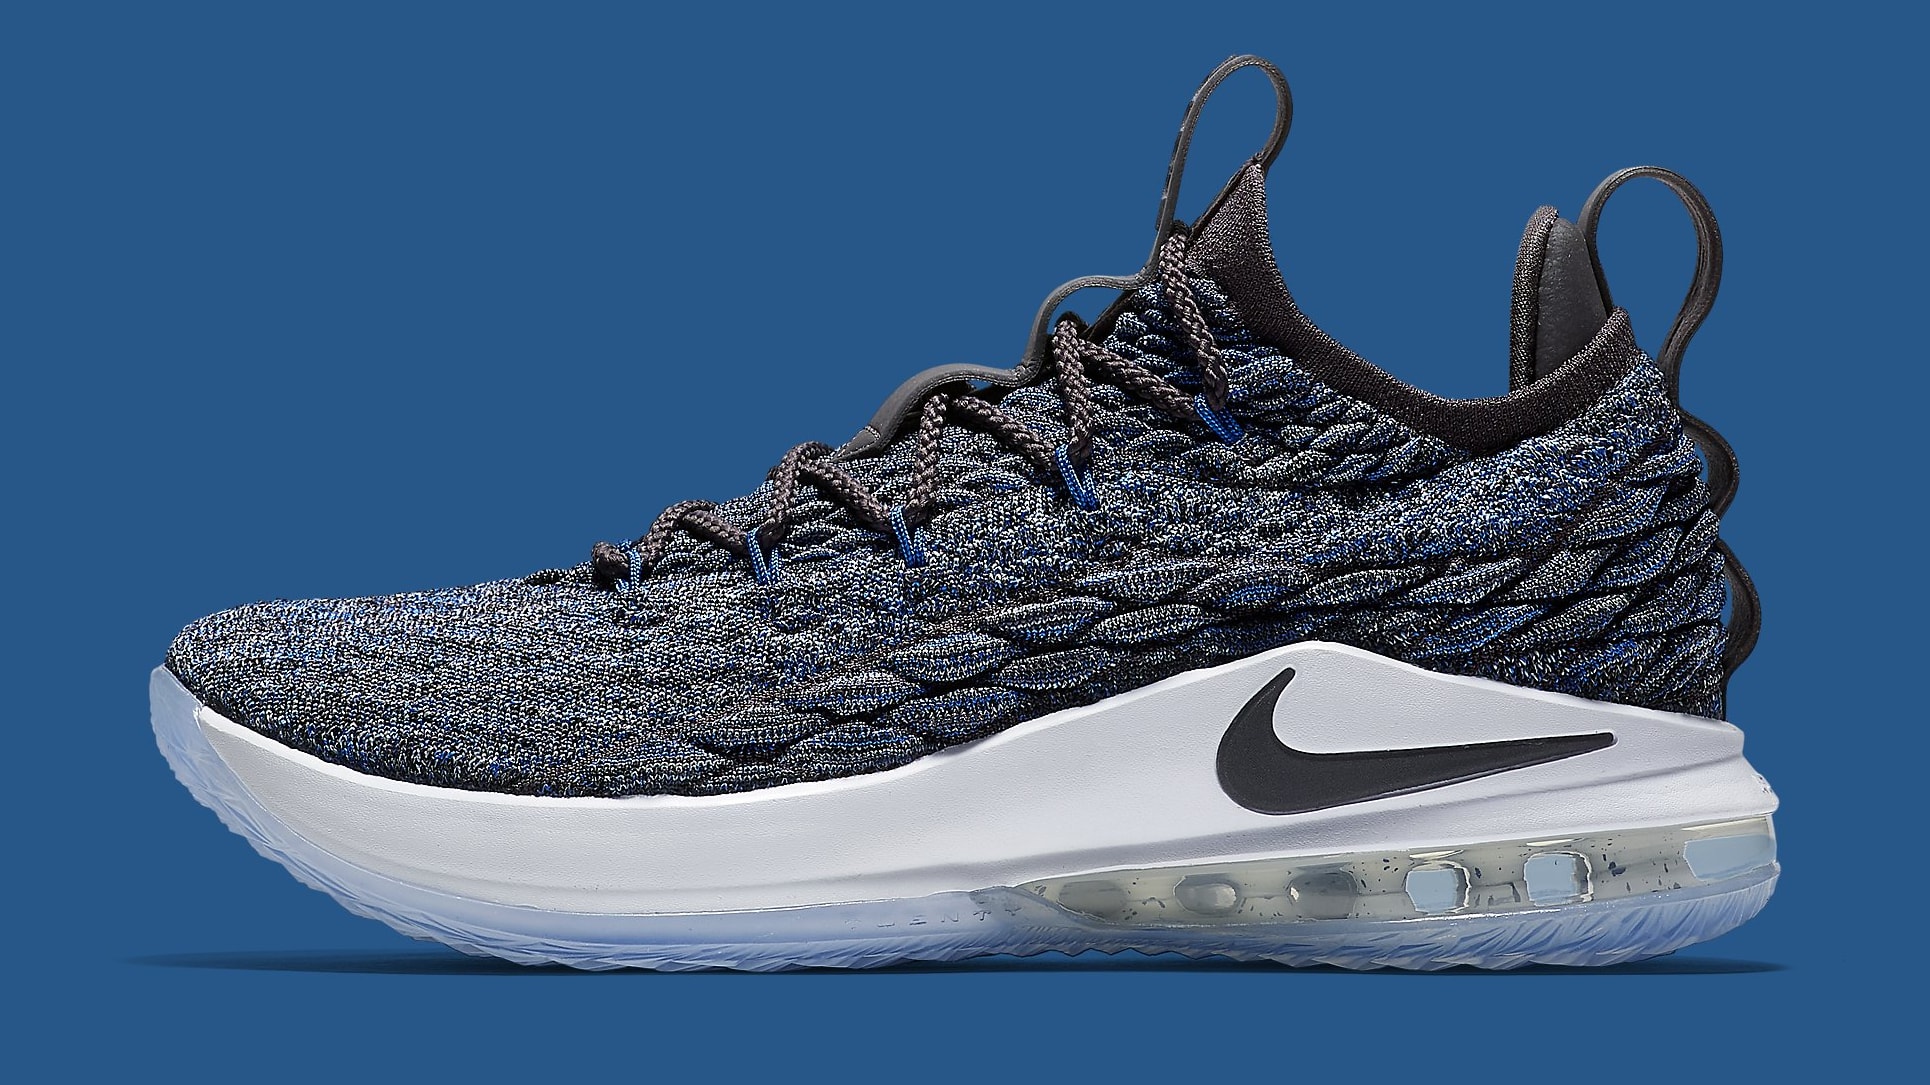 lebron 15 low release date